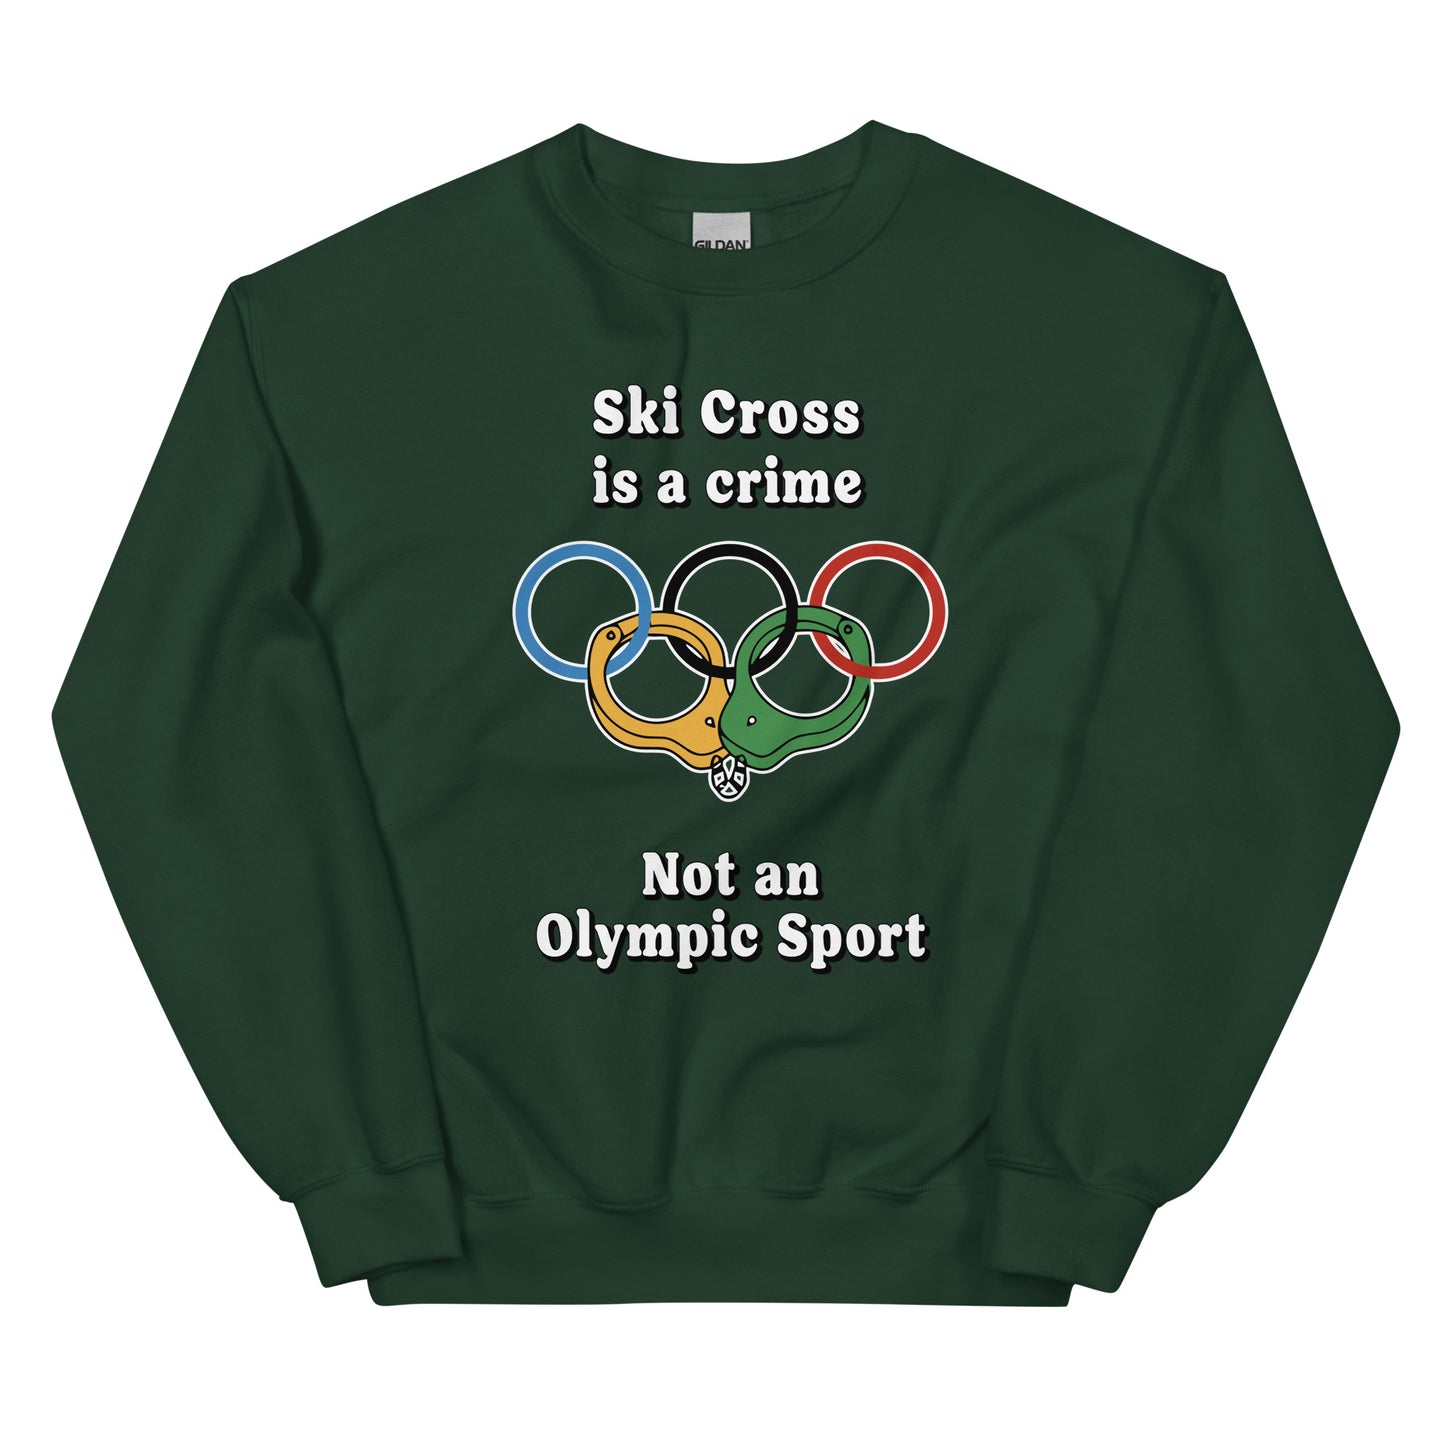 Ski Cross is a crime not an olympic sport design printed on a crewneck sweatshirt by Whistler Shirts